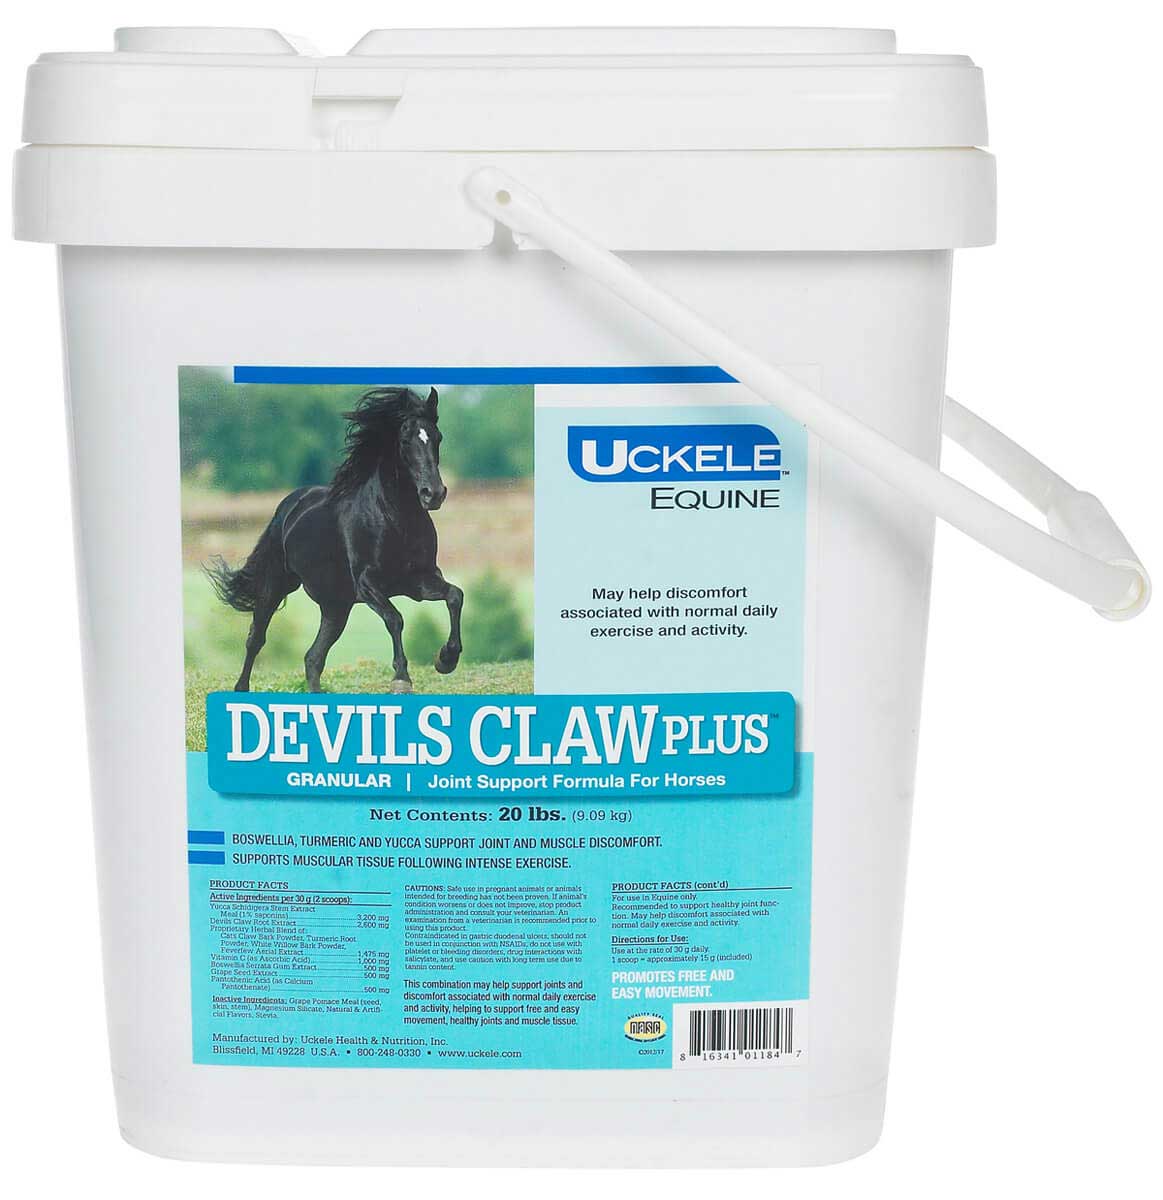 Devils Claw Plus Joint Support Granular for Horses by Uckele Health & Nutrition, 20 lb (320-640 Days)